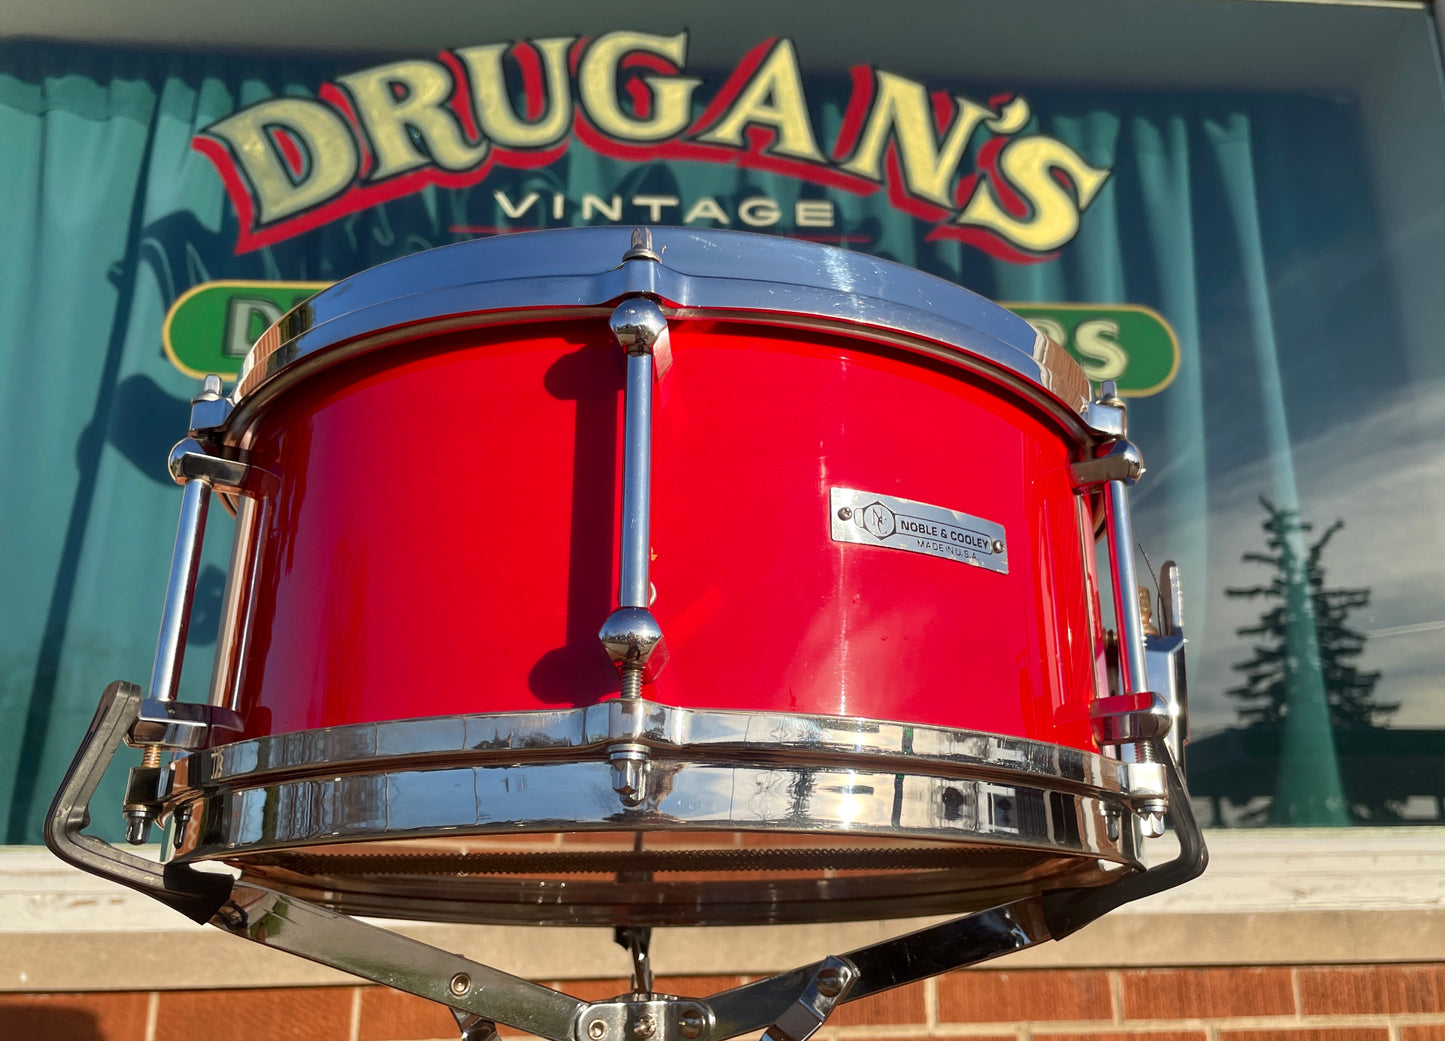 1993 Noble & Cooley 6x13 Horizon Series 7-Ply Snare Drum Red - Early Model